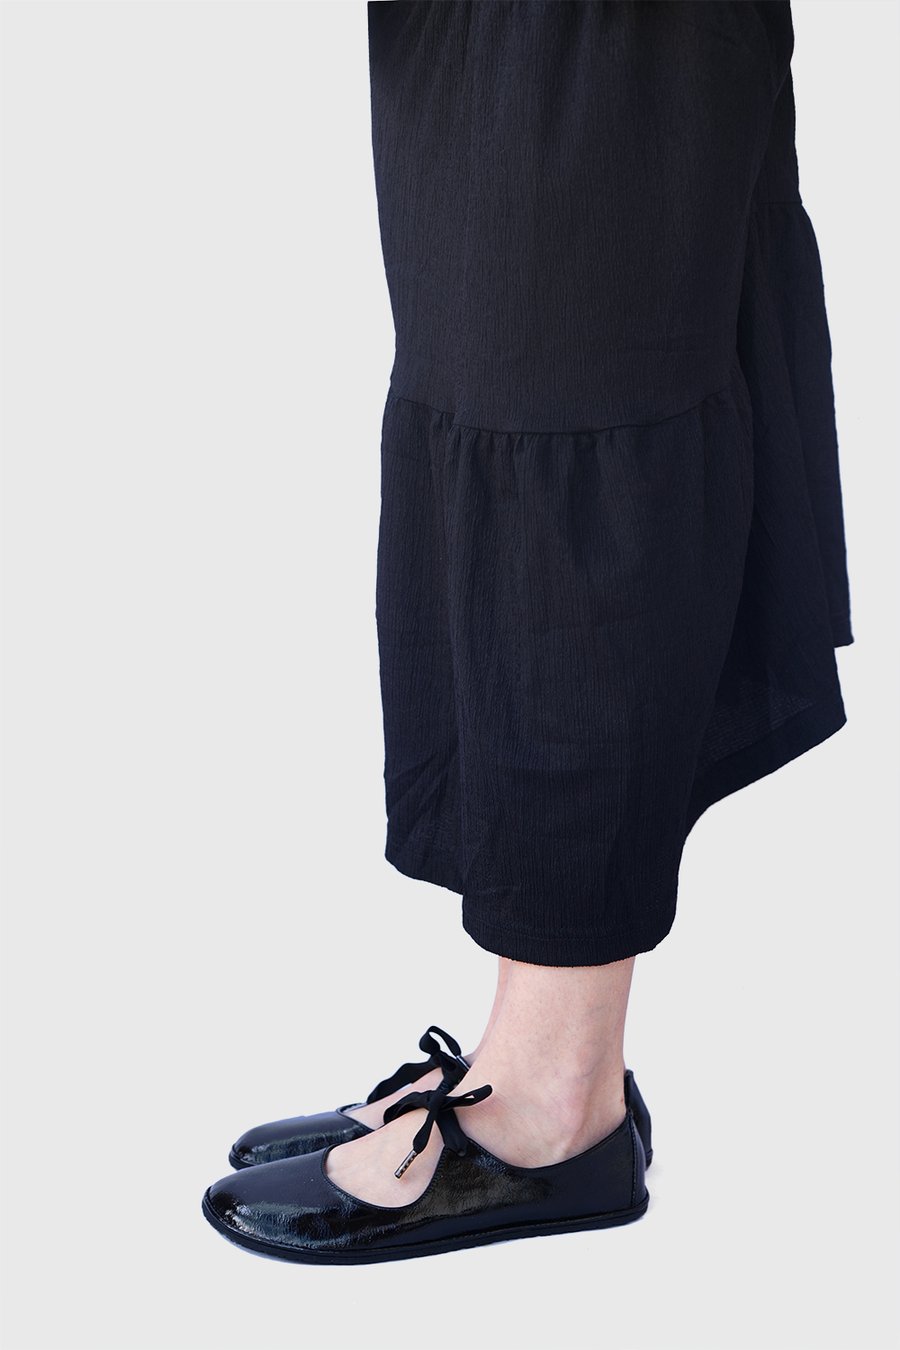 Image of Passion Ballet flats in Patent black 